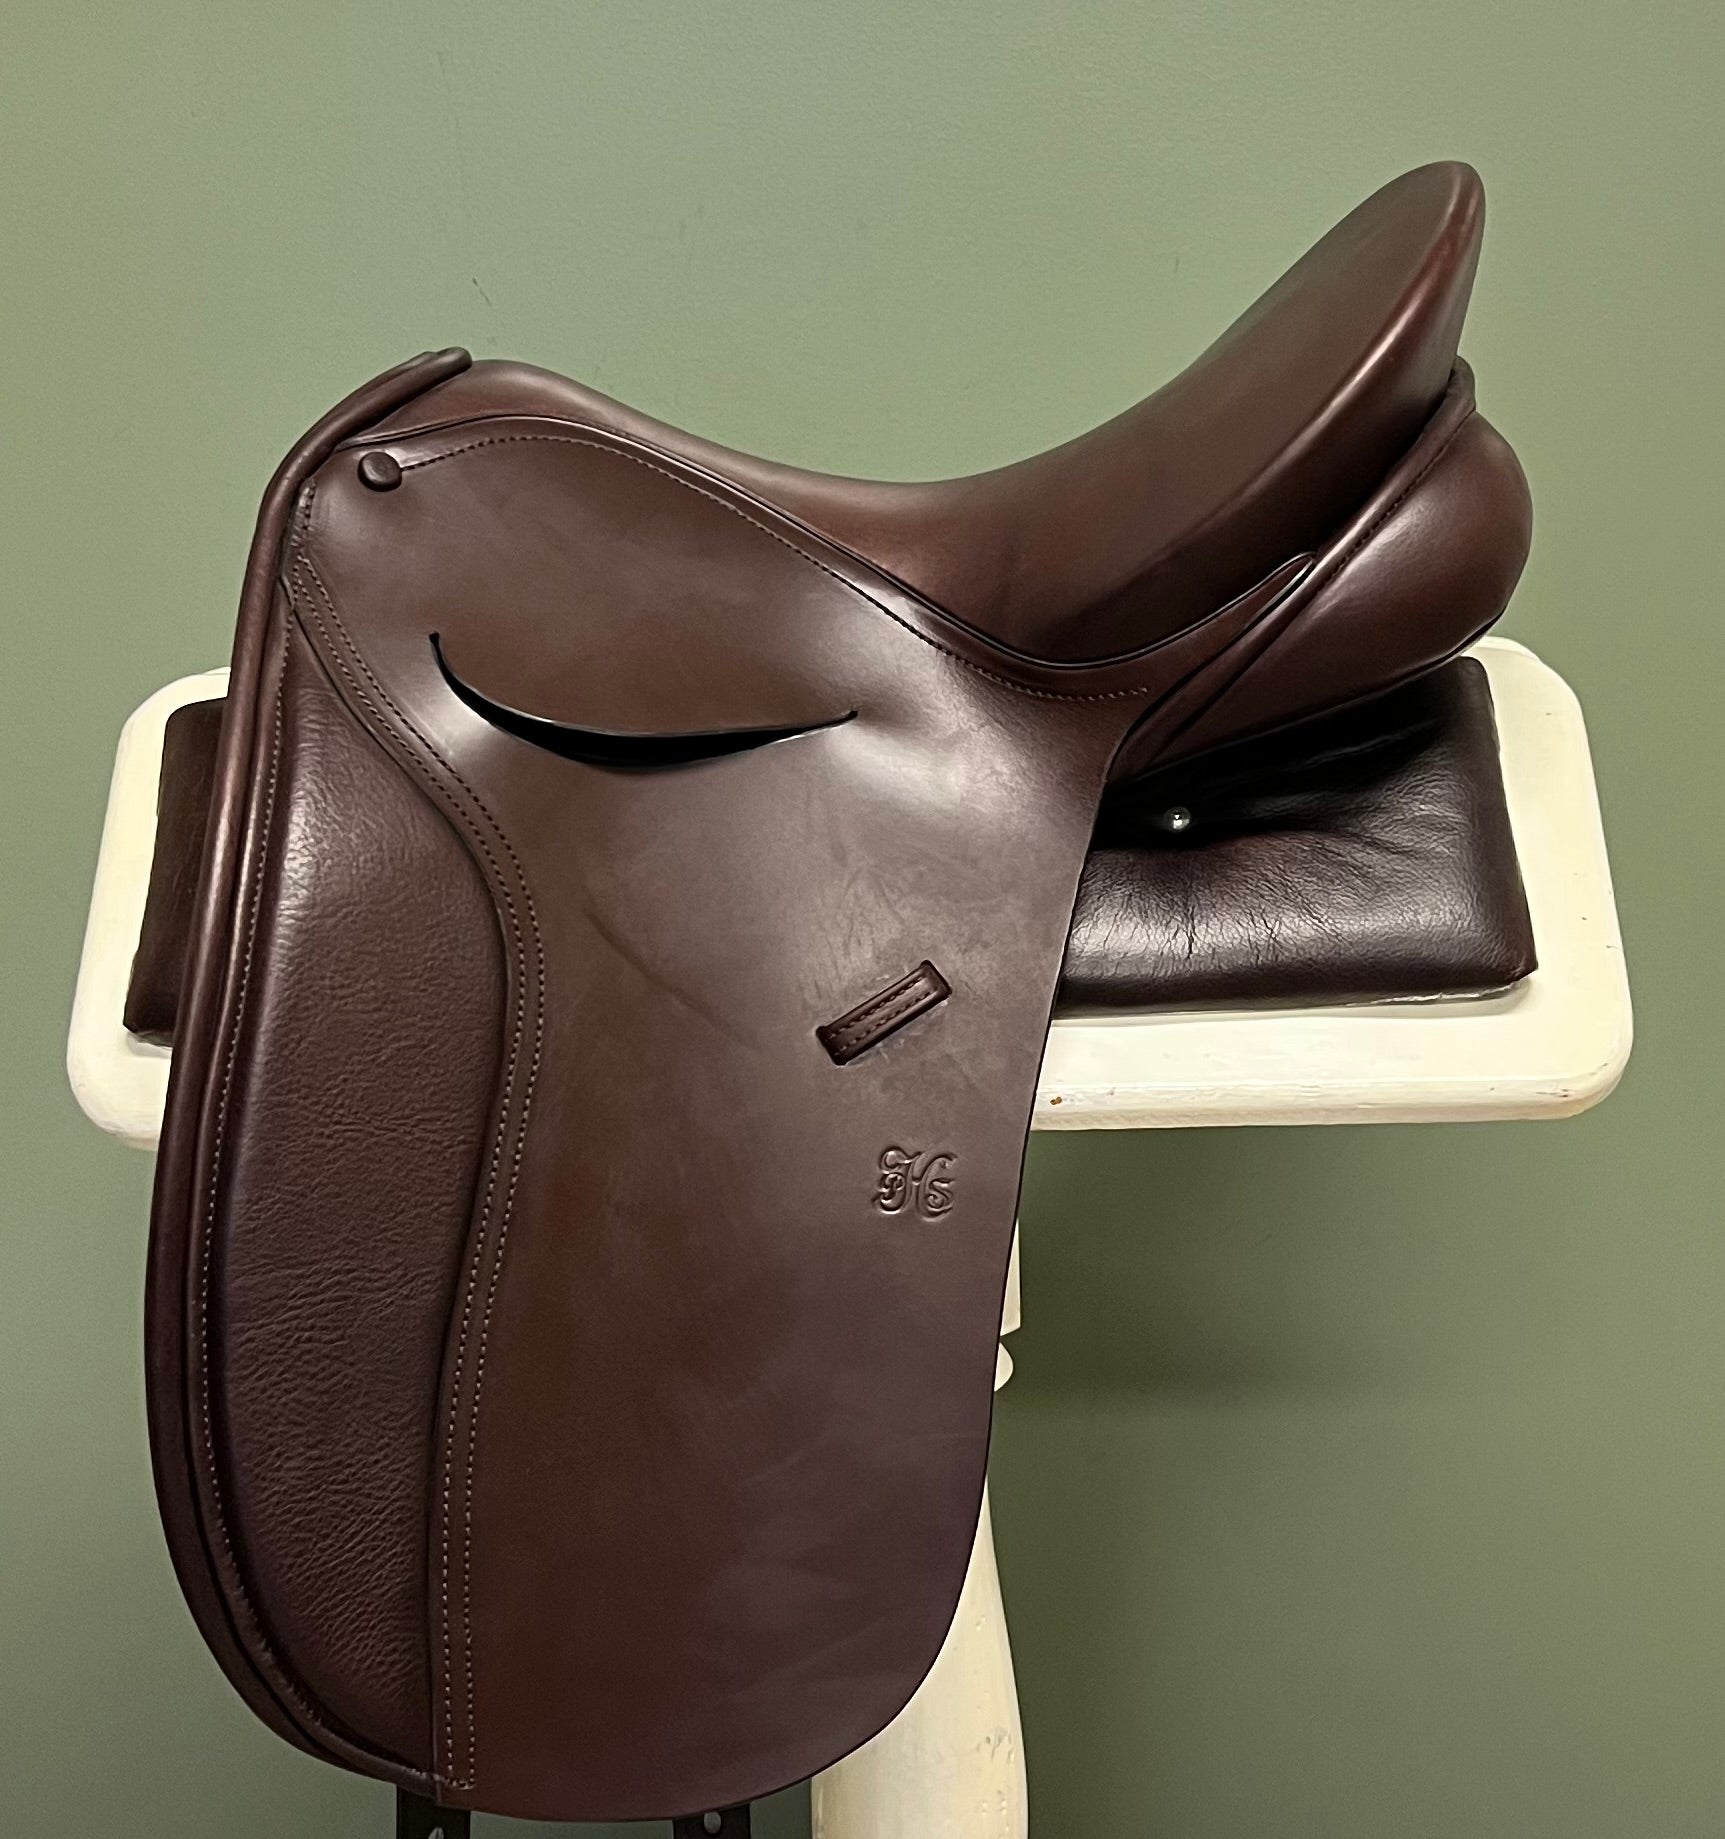 STOCK CLEARANCE Ph Royal 2 Saddle in Chestnut Size 16"